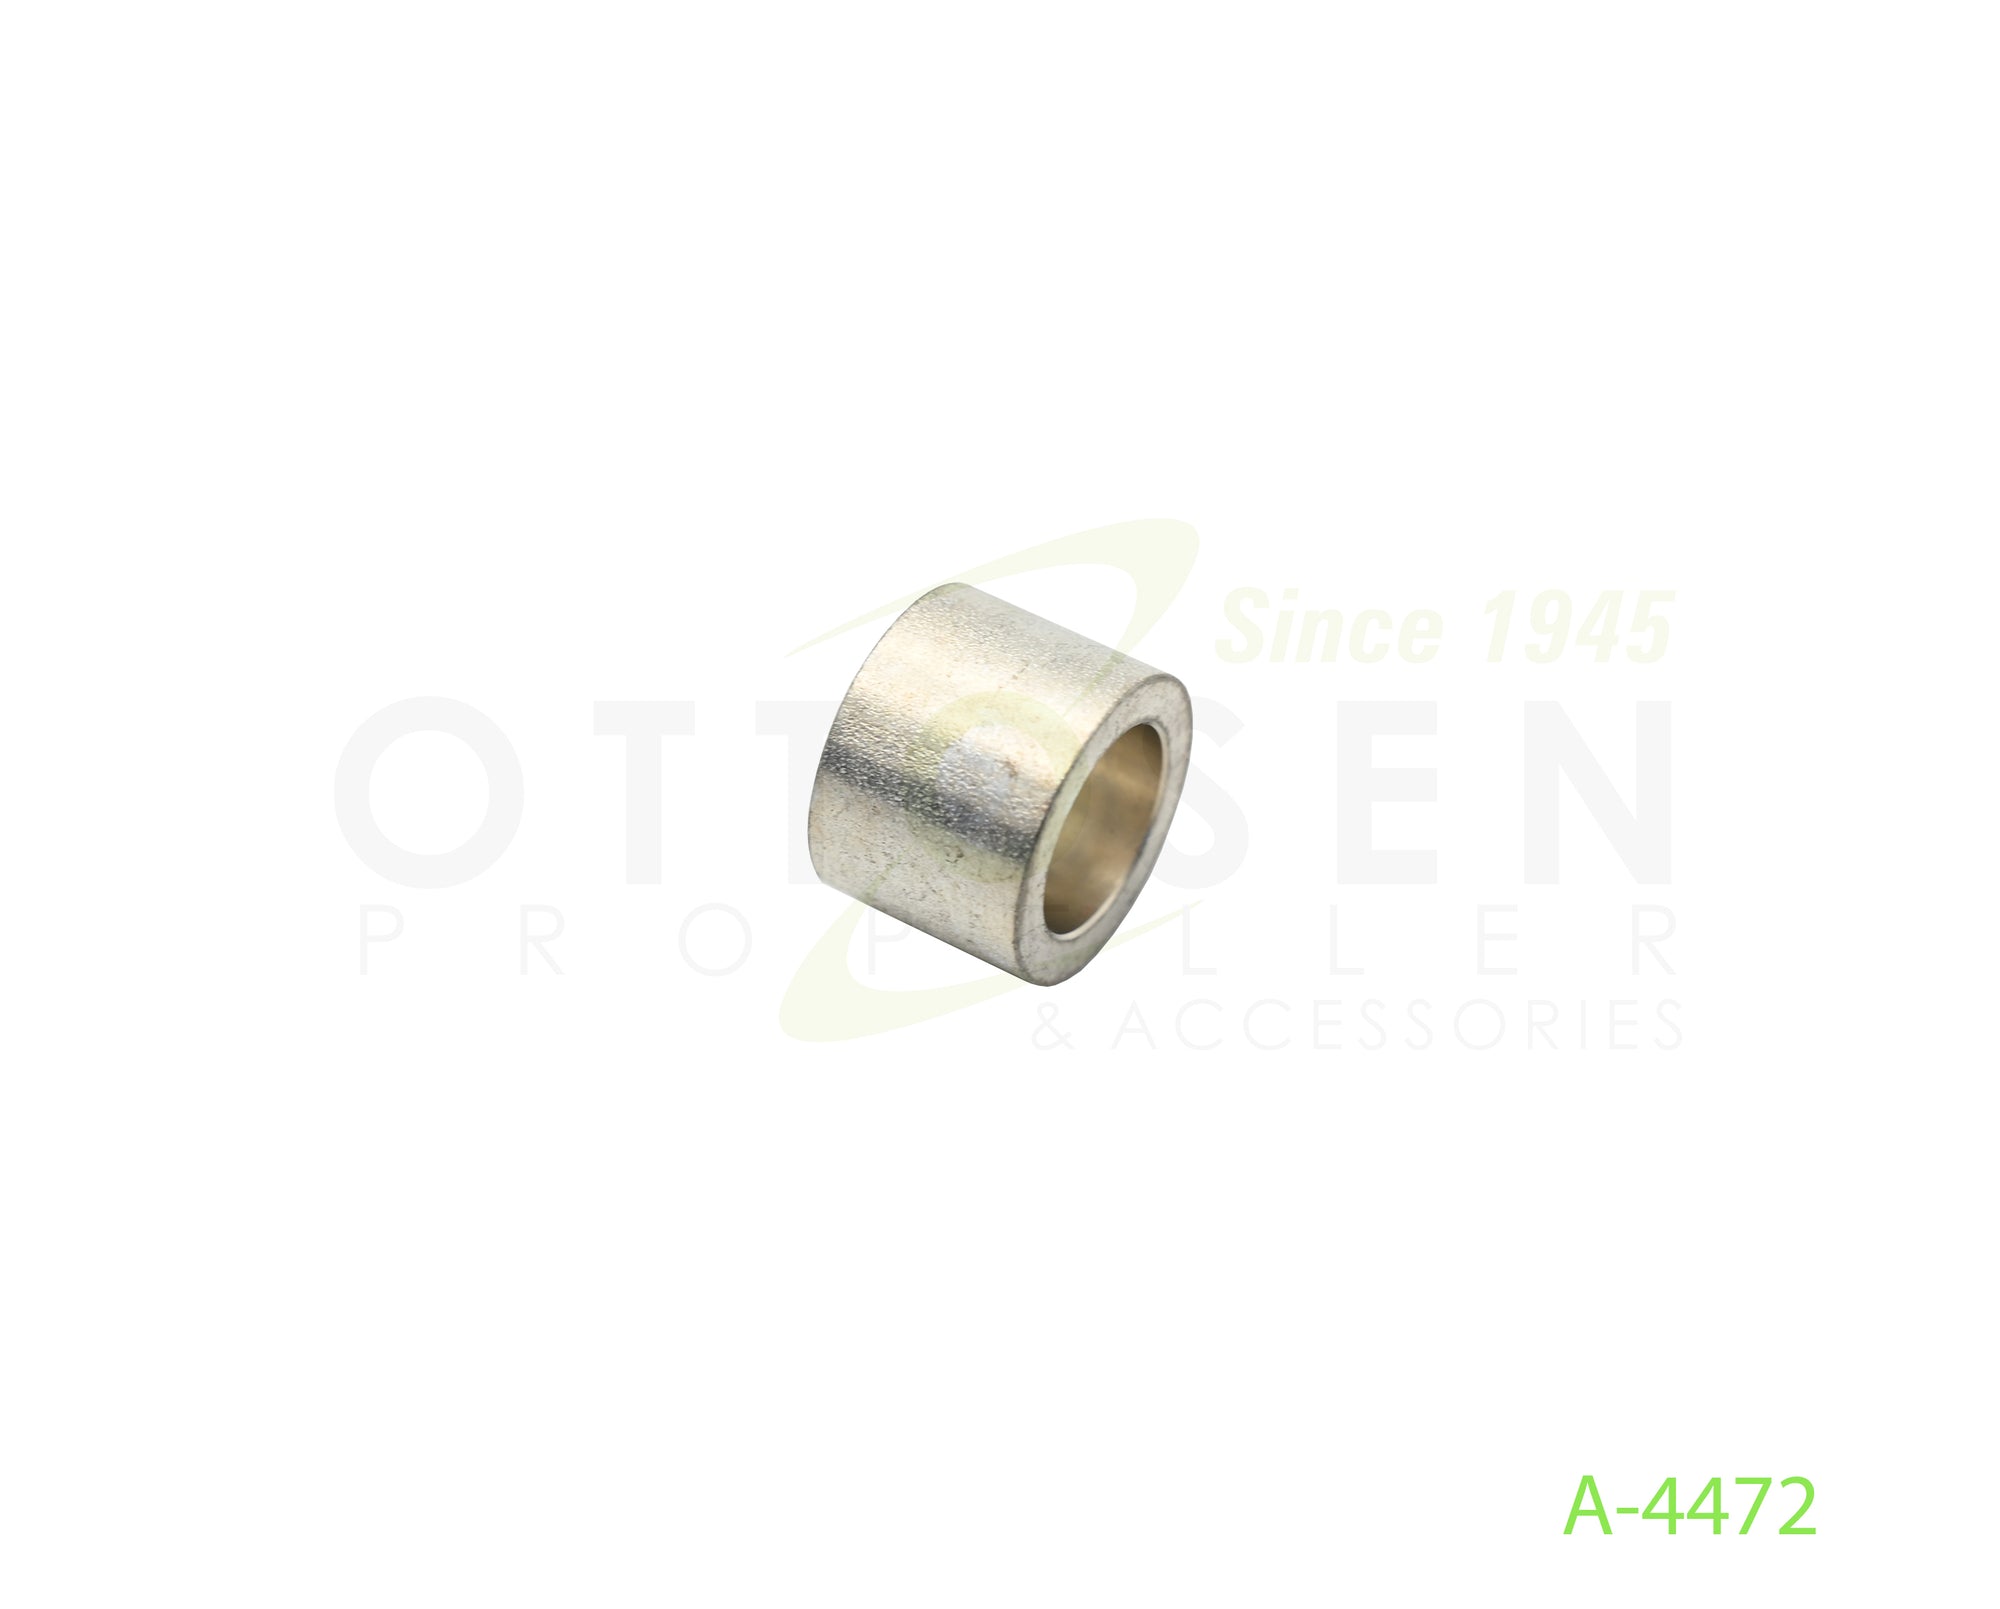 A-4472-McCAULEY-PROPELLER-STUD-SPACER-PICTURE-1